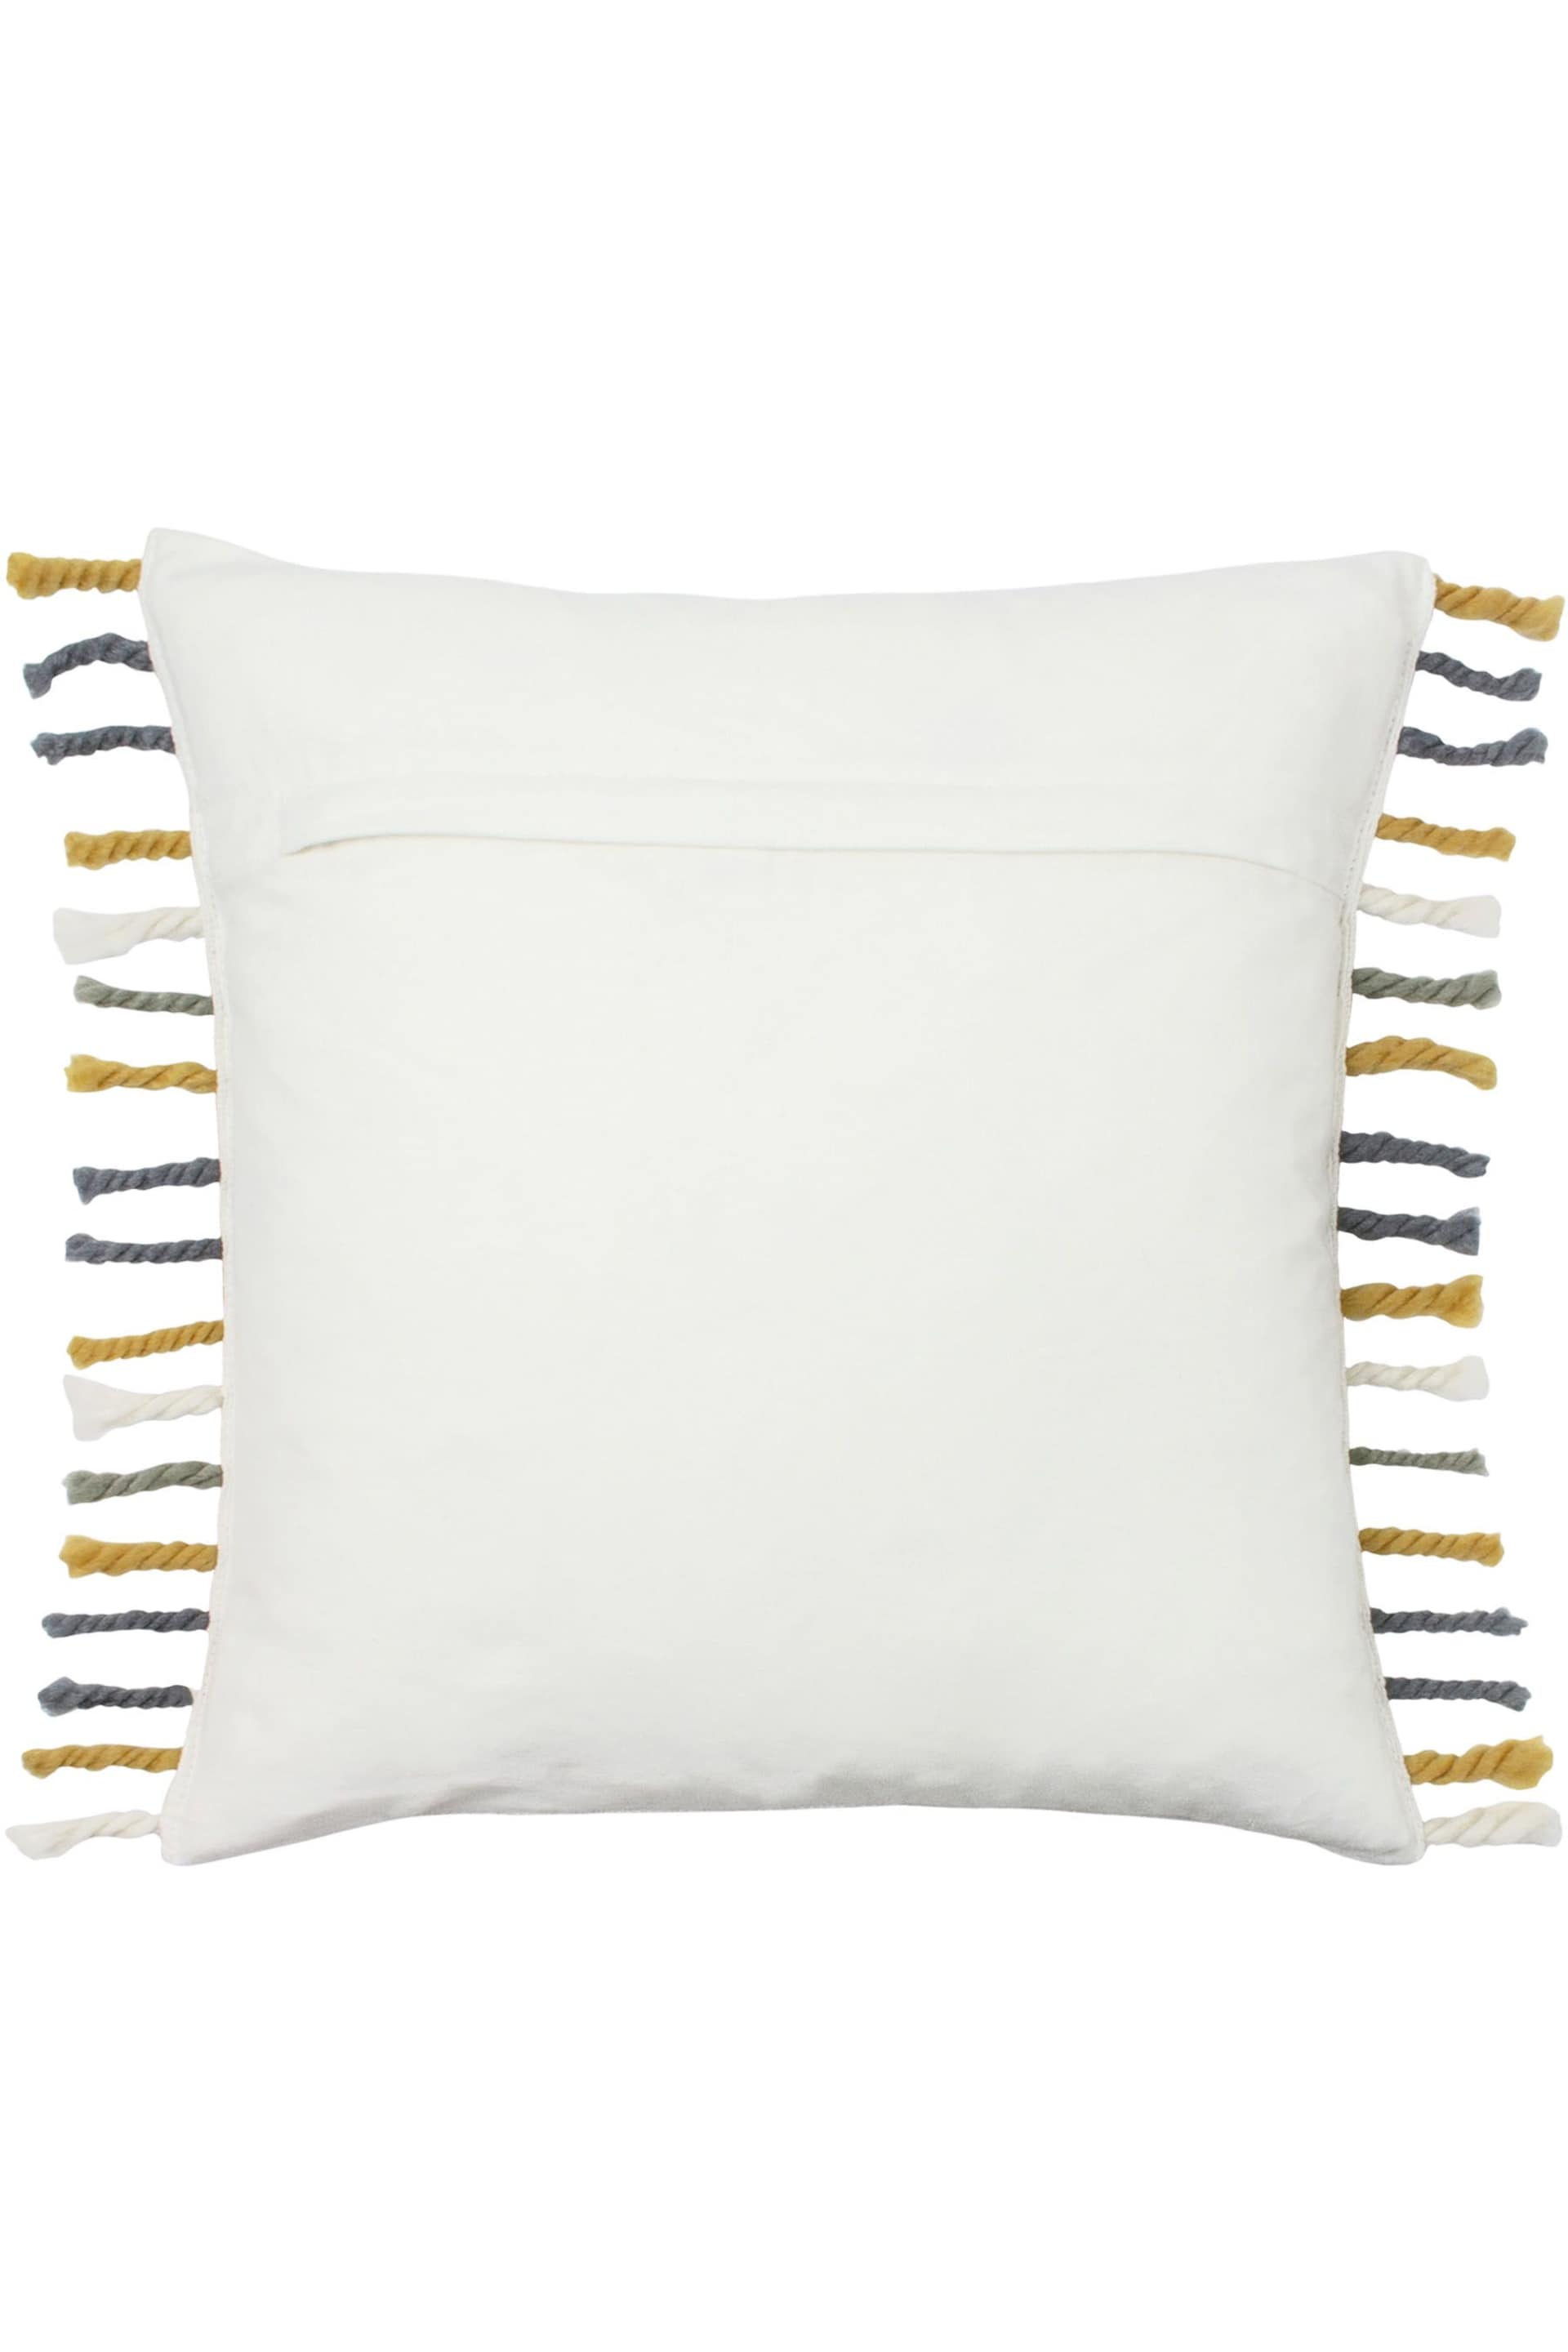 furn. Ochre Yellow/Natural Beige Dhadit Striped Polyester Filled Cushion - Image 2 of 6